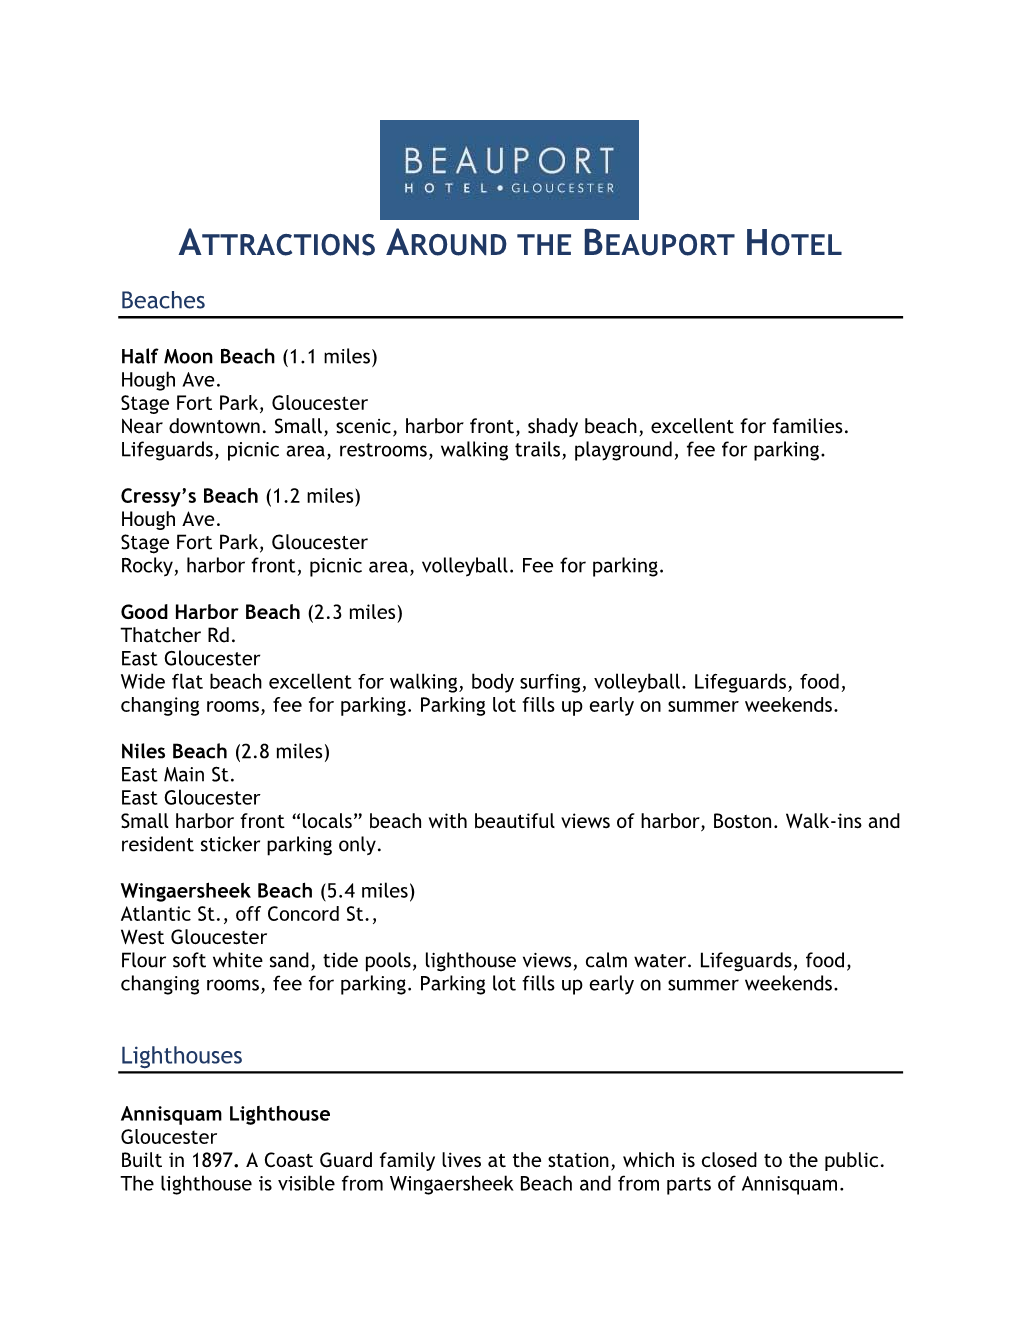 Attractions Around the Beauport Hotel